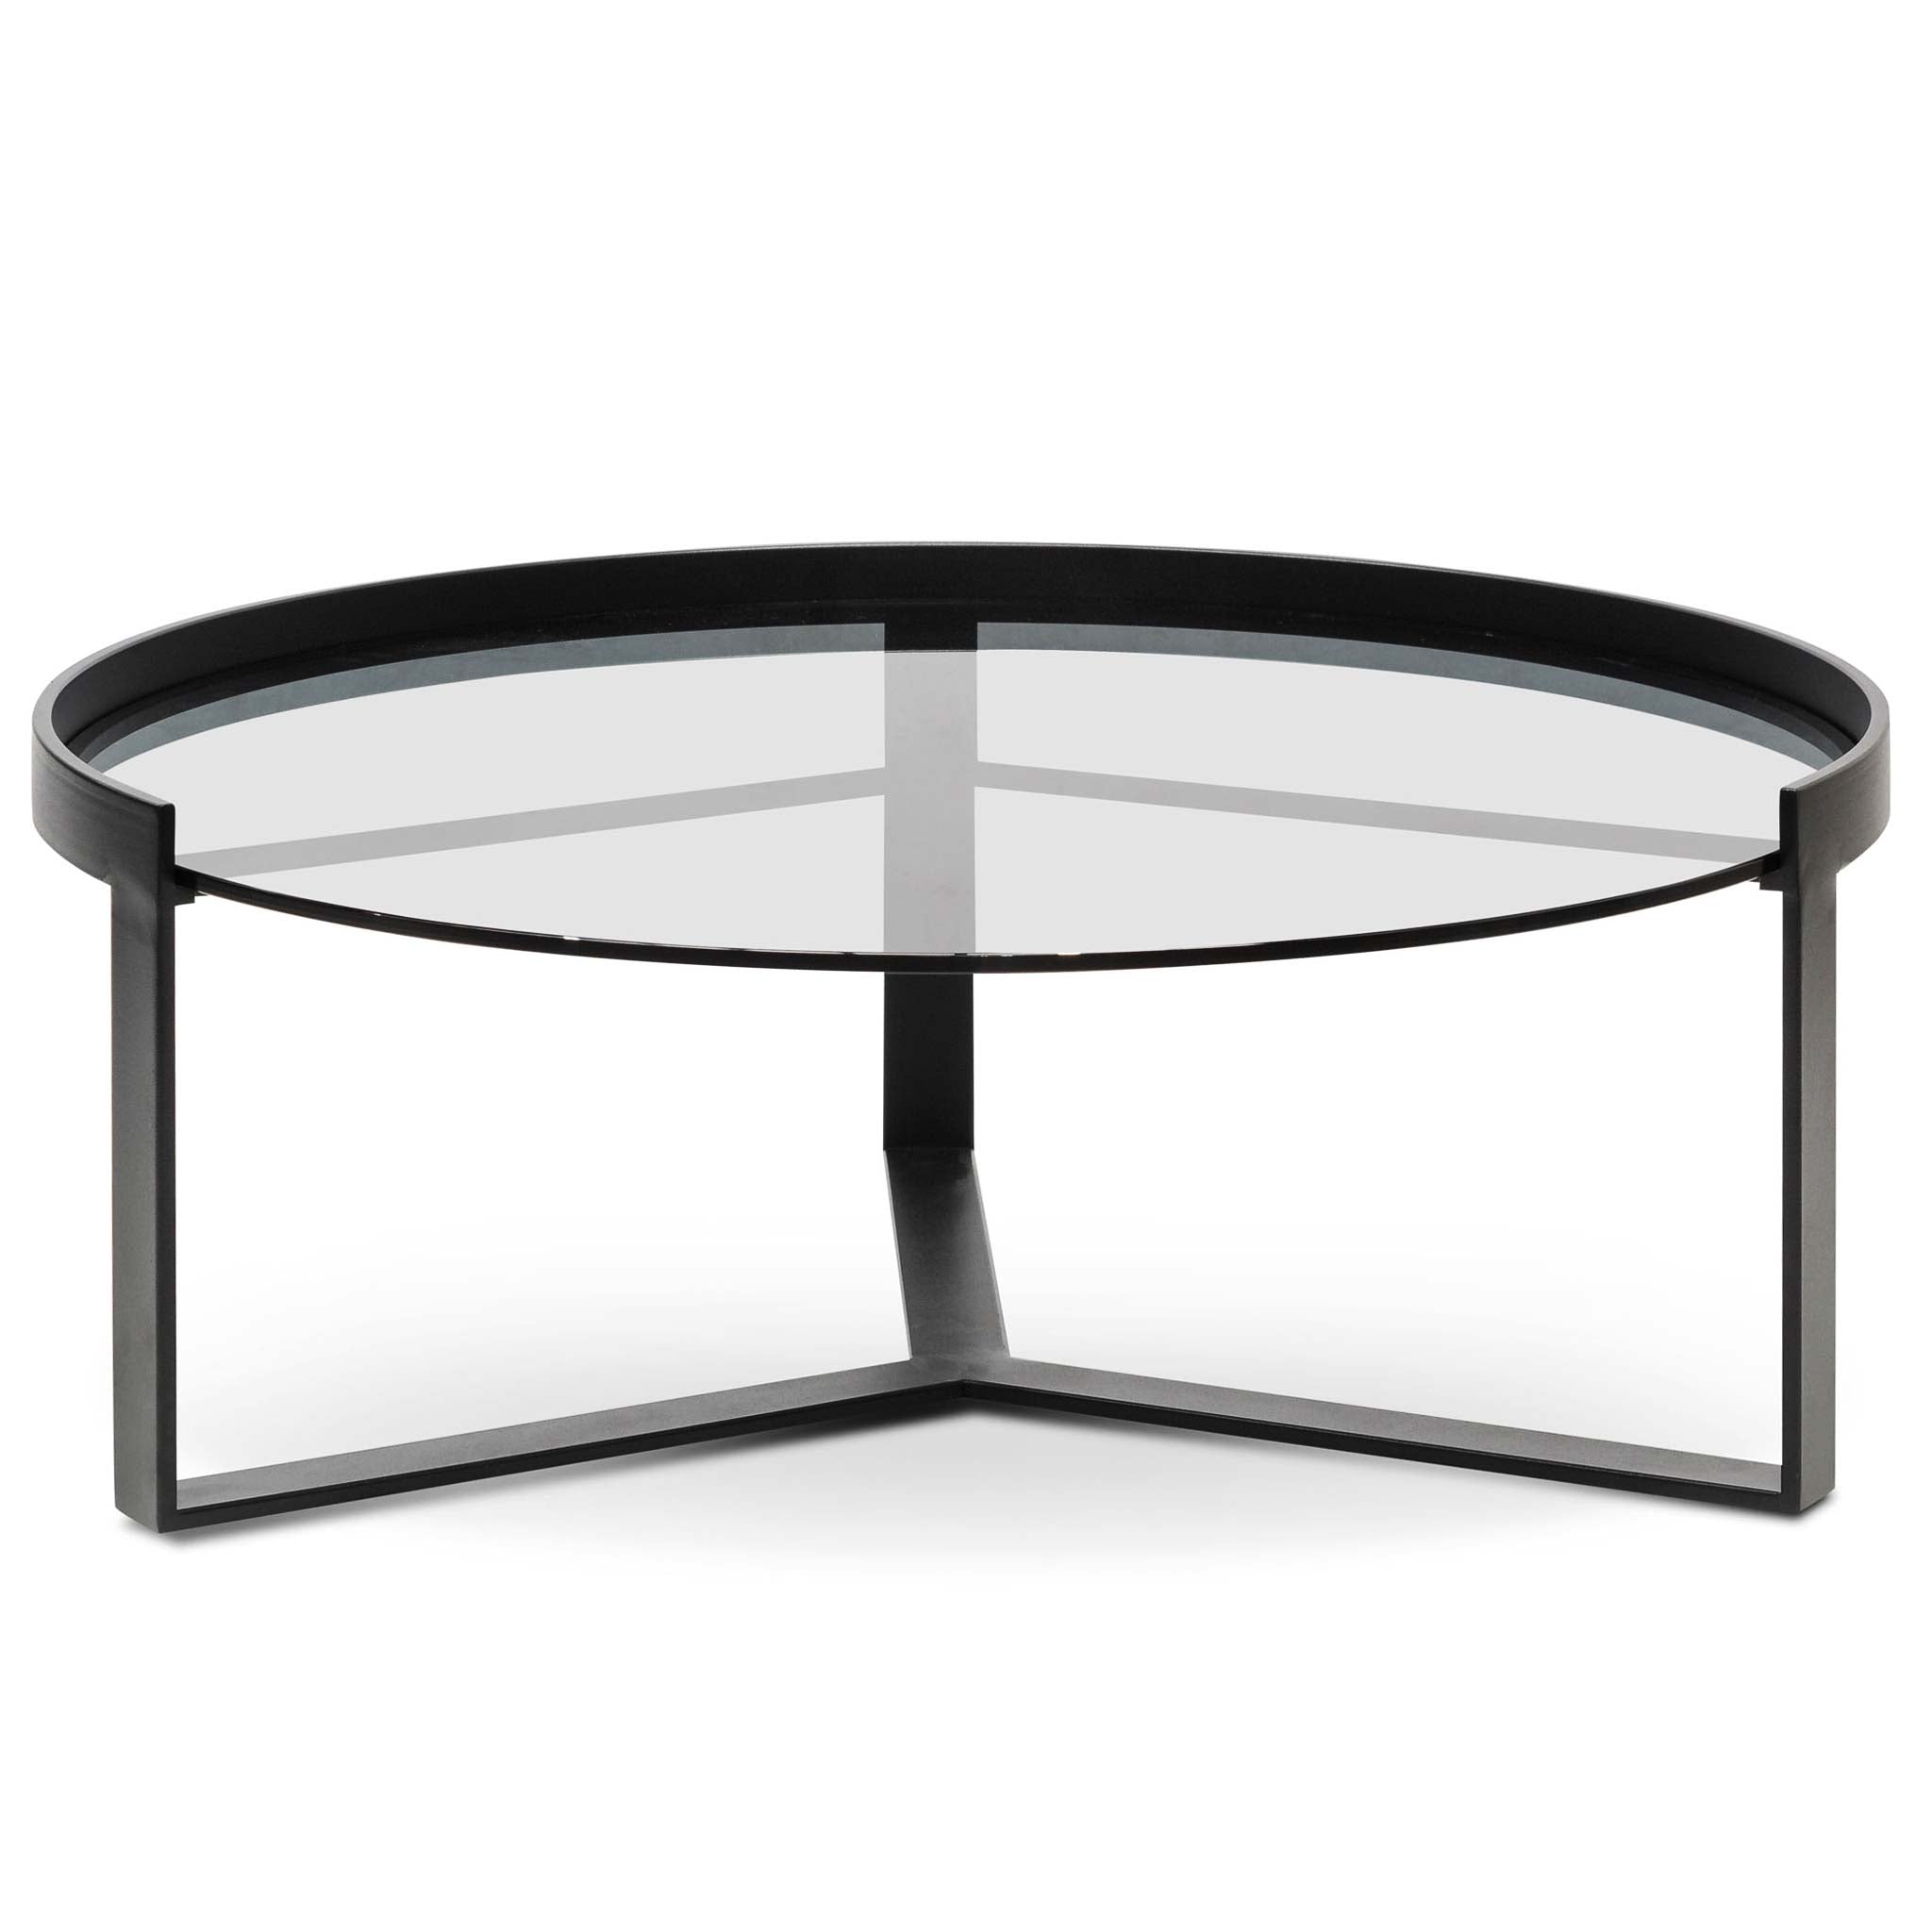 90cm Glass Coffee Table - Large_1